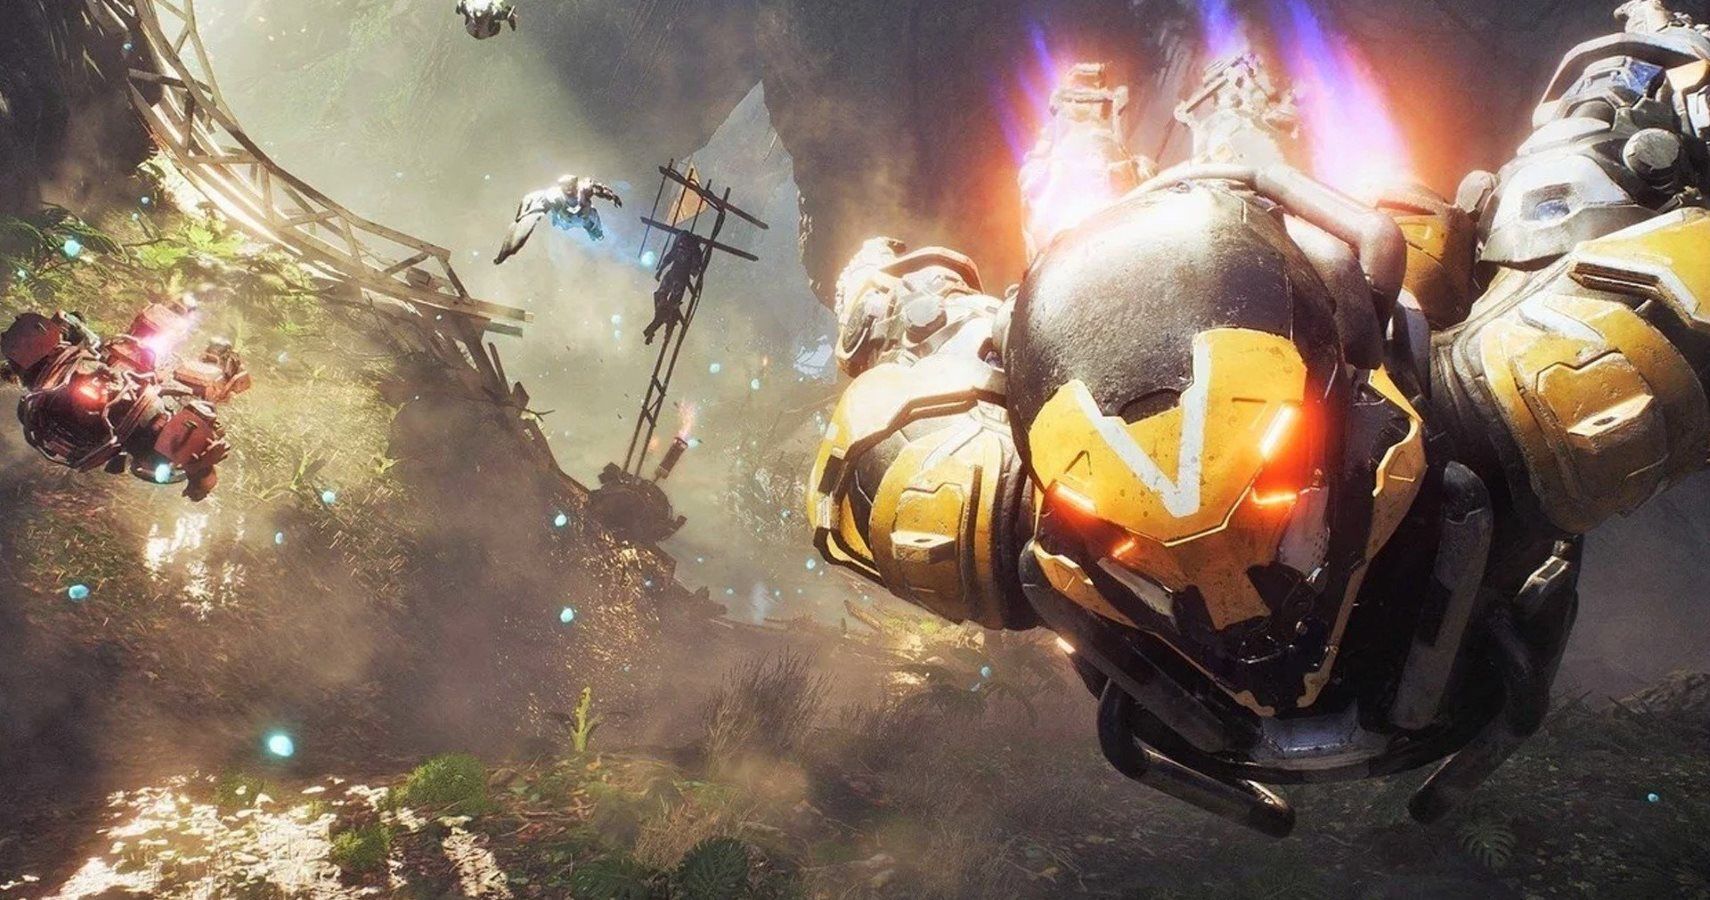 BioWare Responds To Anthem Criticism With Open Letter To Fans